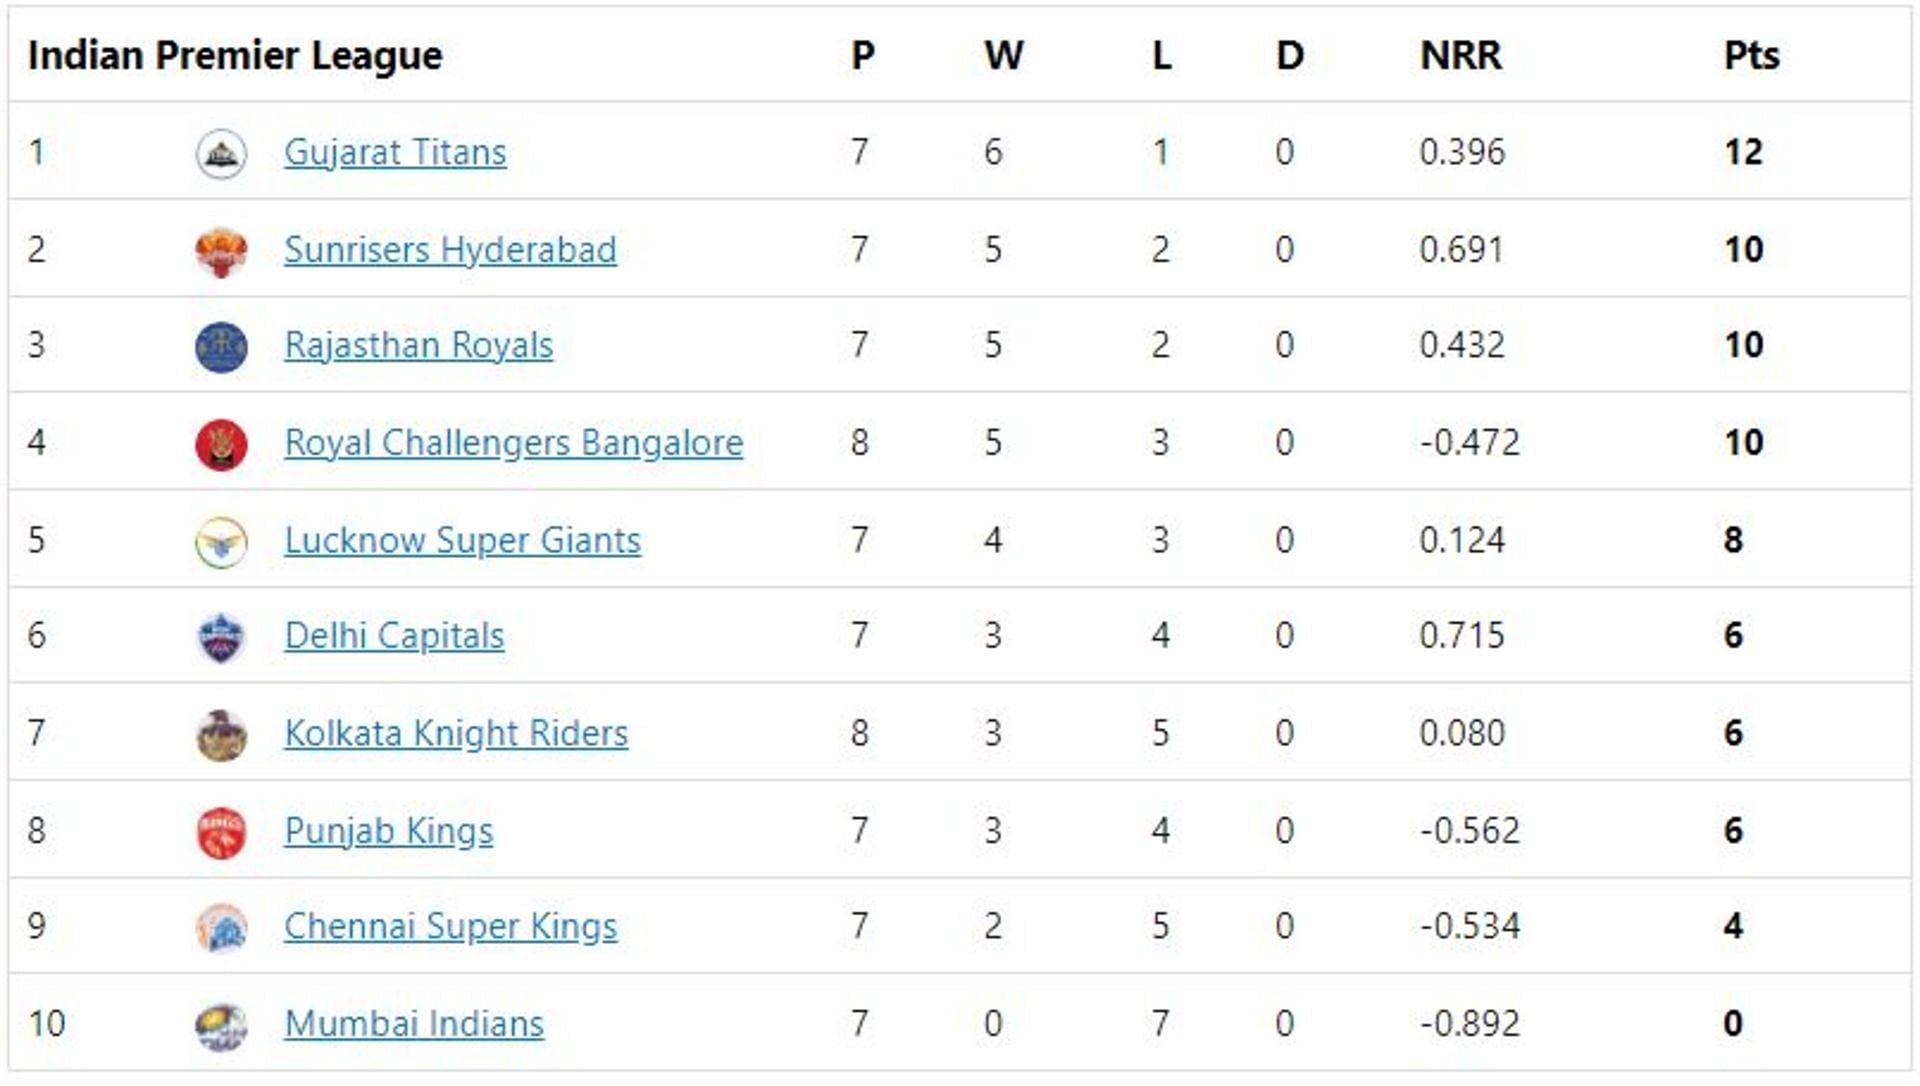 SRH move to the second position in the table.